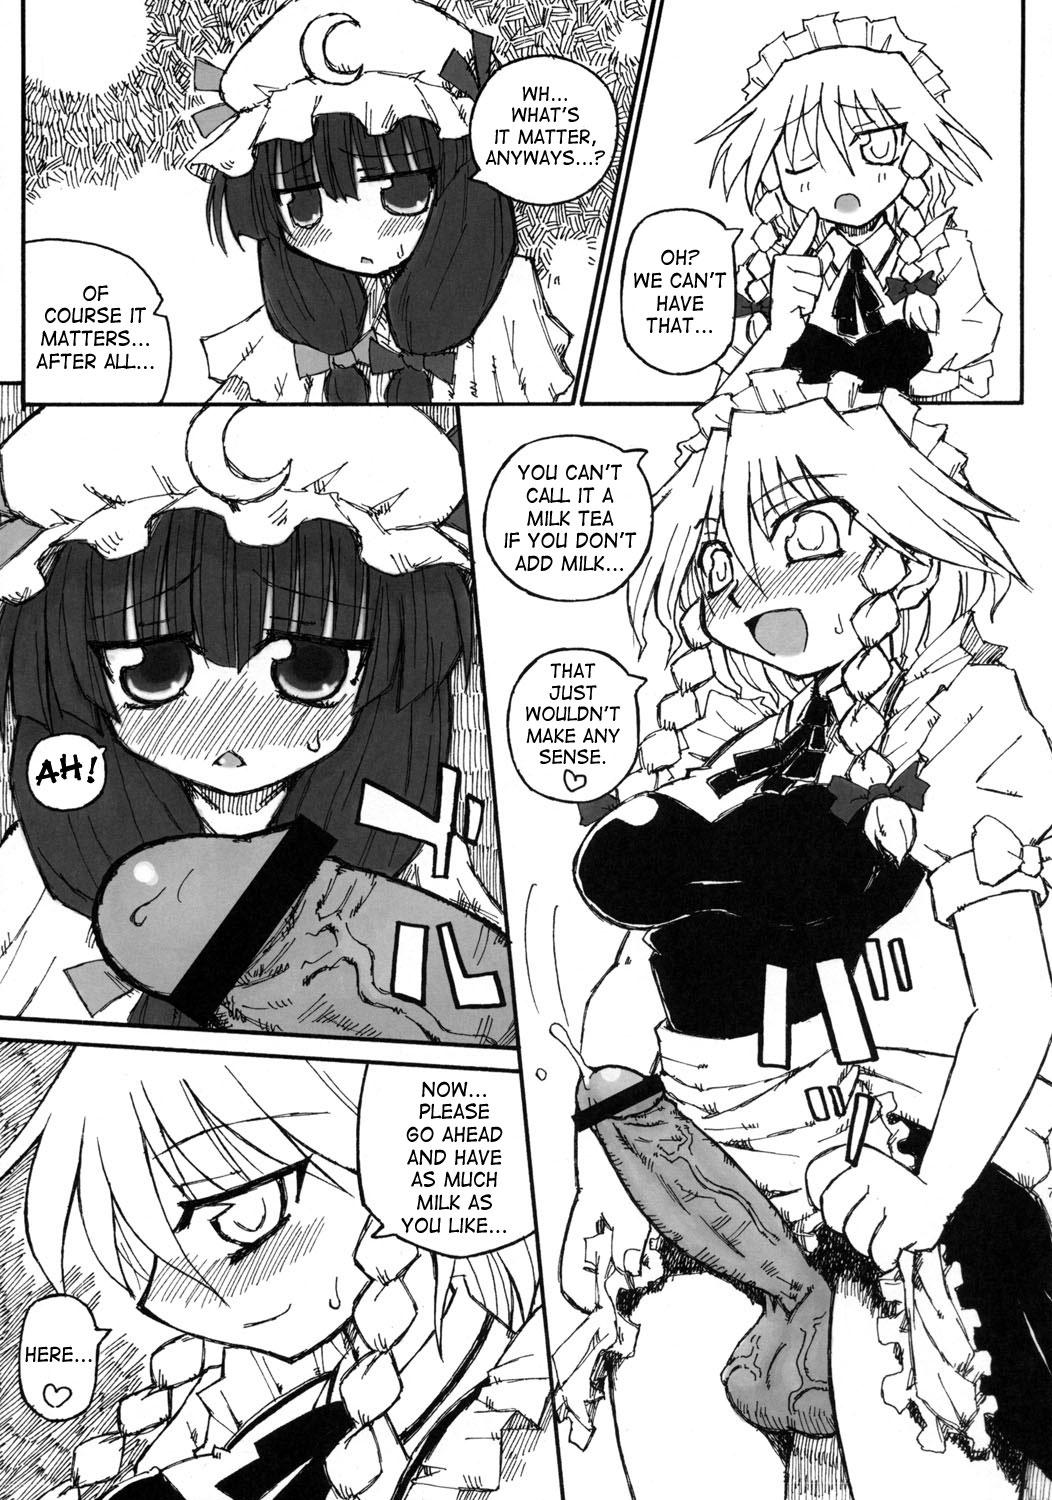 Leche Seireitsukai no Gogo | Afternoon of The Sorceress - Touhou project Sola - Page 6